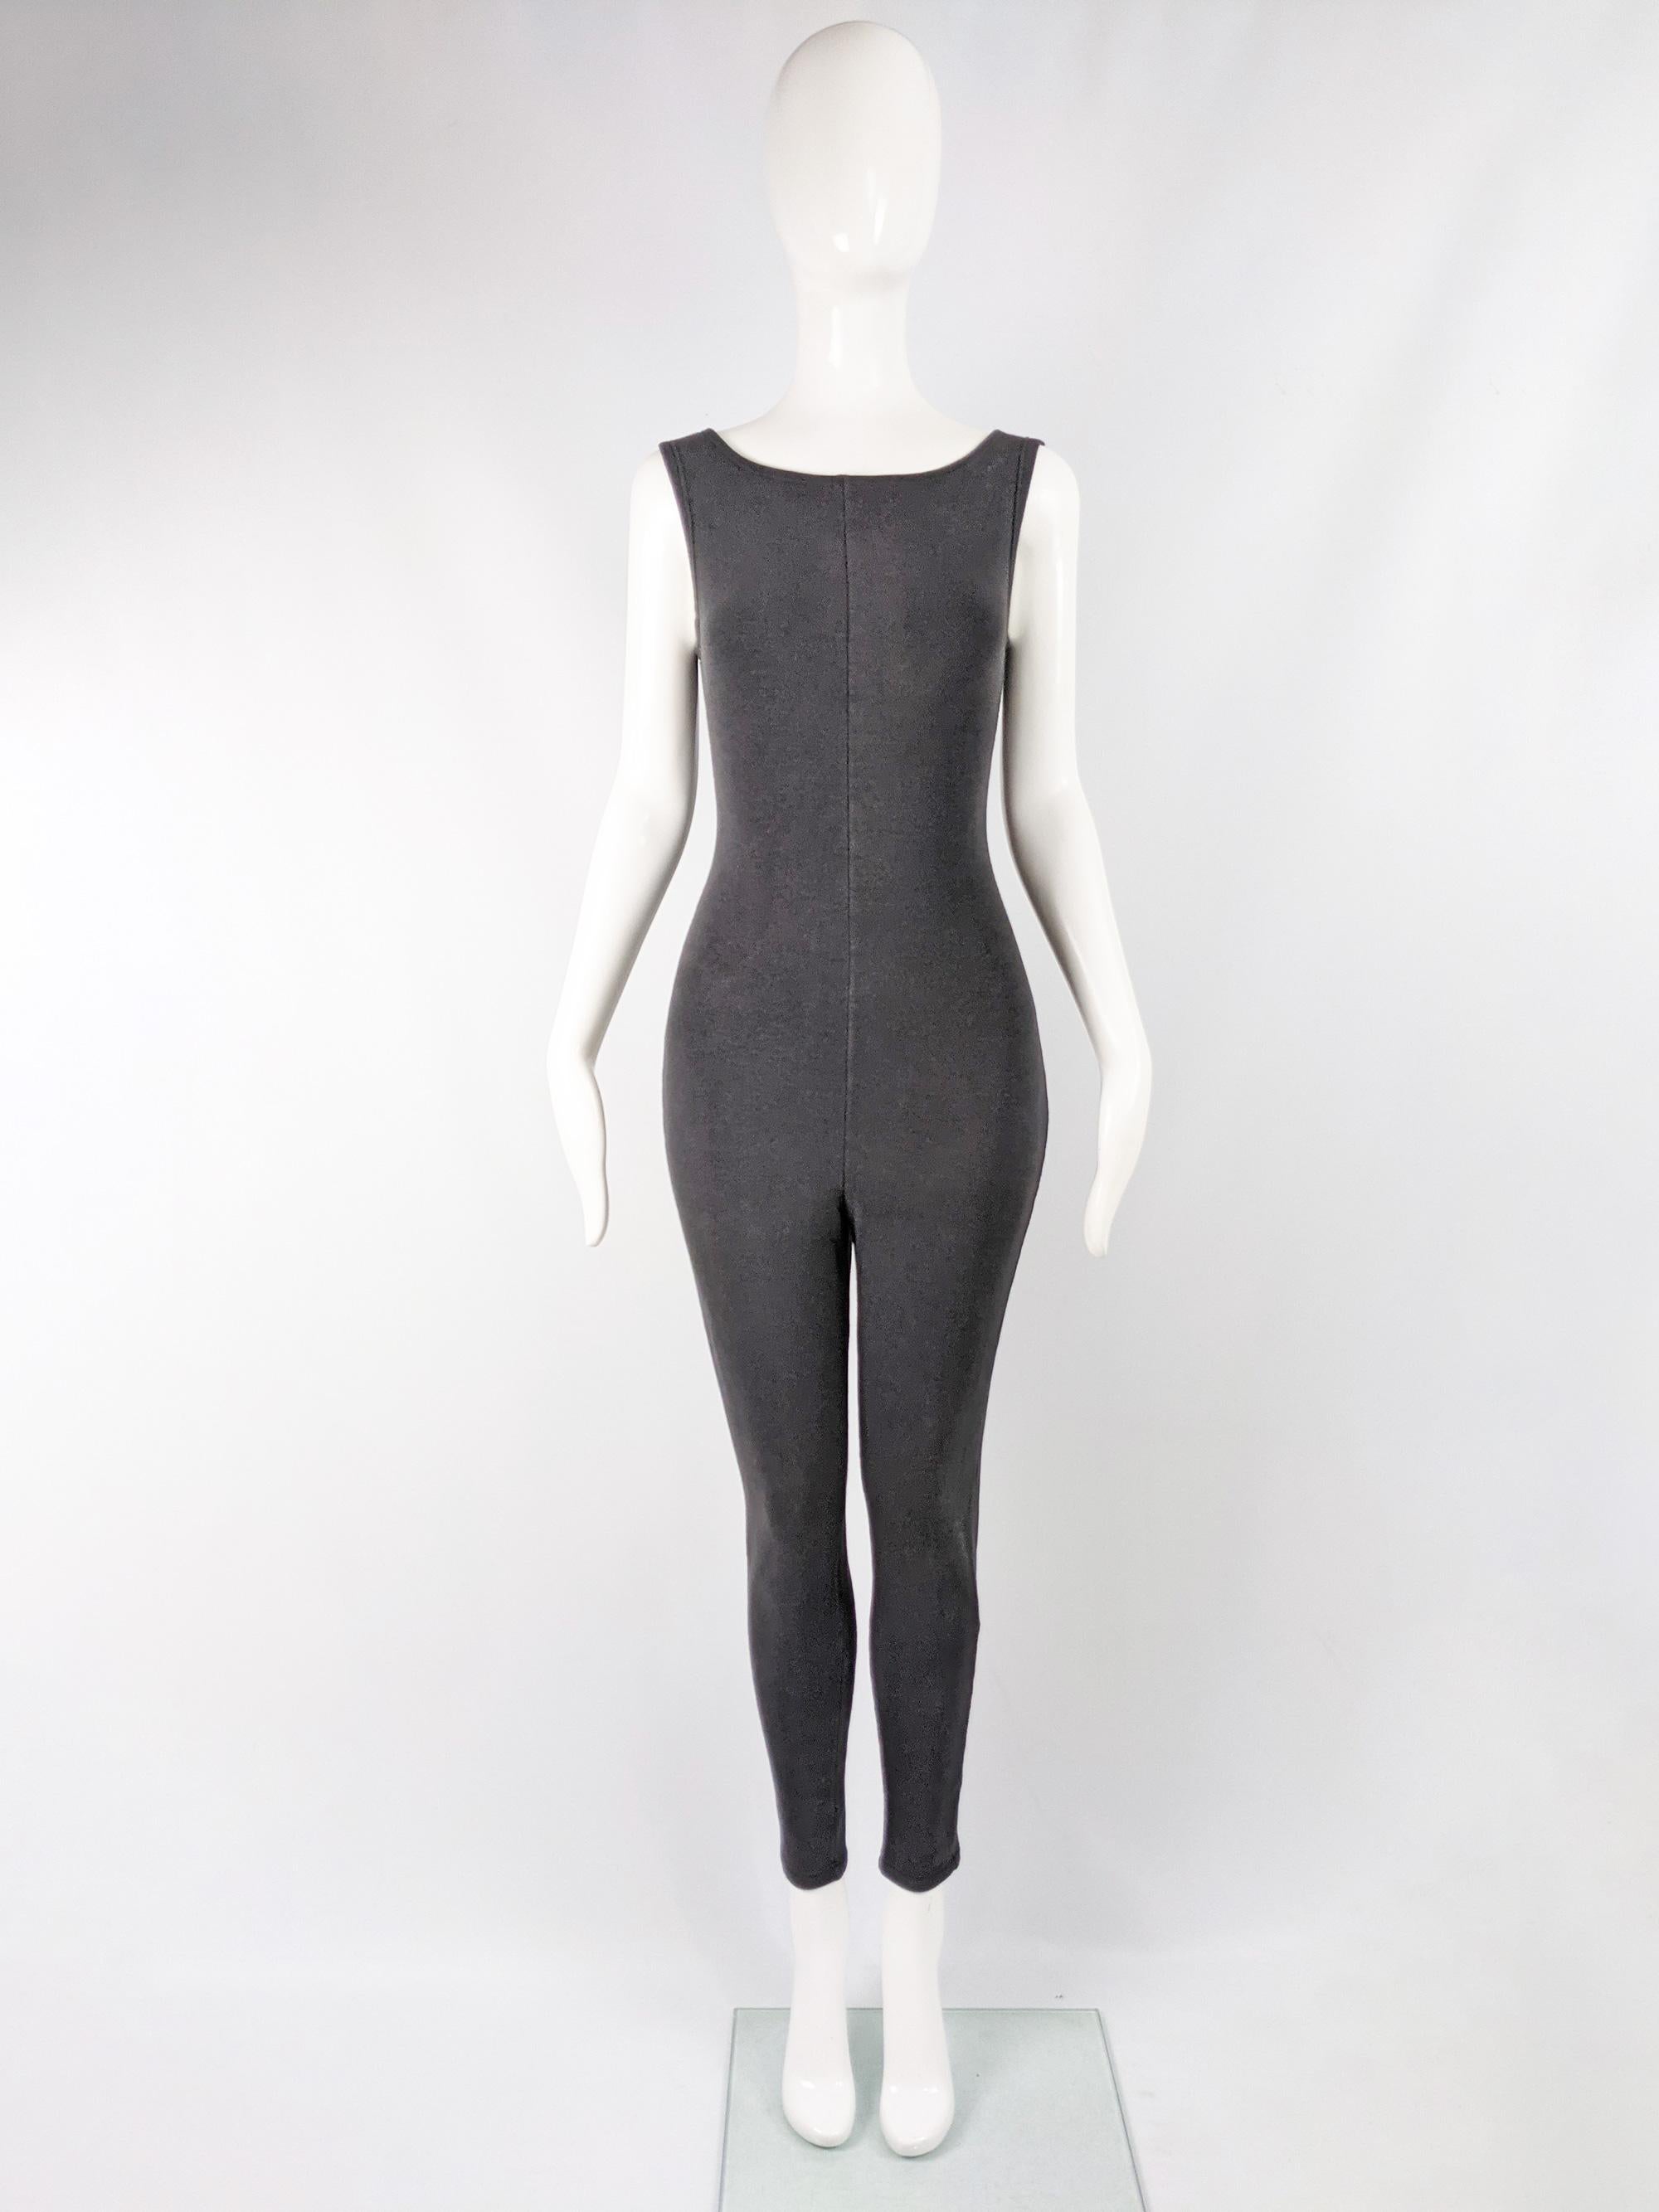 A fabulous and rare vintage Jean Paul Gaultier jumpsuit from the 80s. In a black or darkest grey body conscious jersey with a sleeveless, minimalist design and long legs.

Size: Marked IT 42 which equates to a UK 10/ US 6/ EU 38. Please check